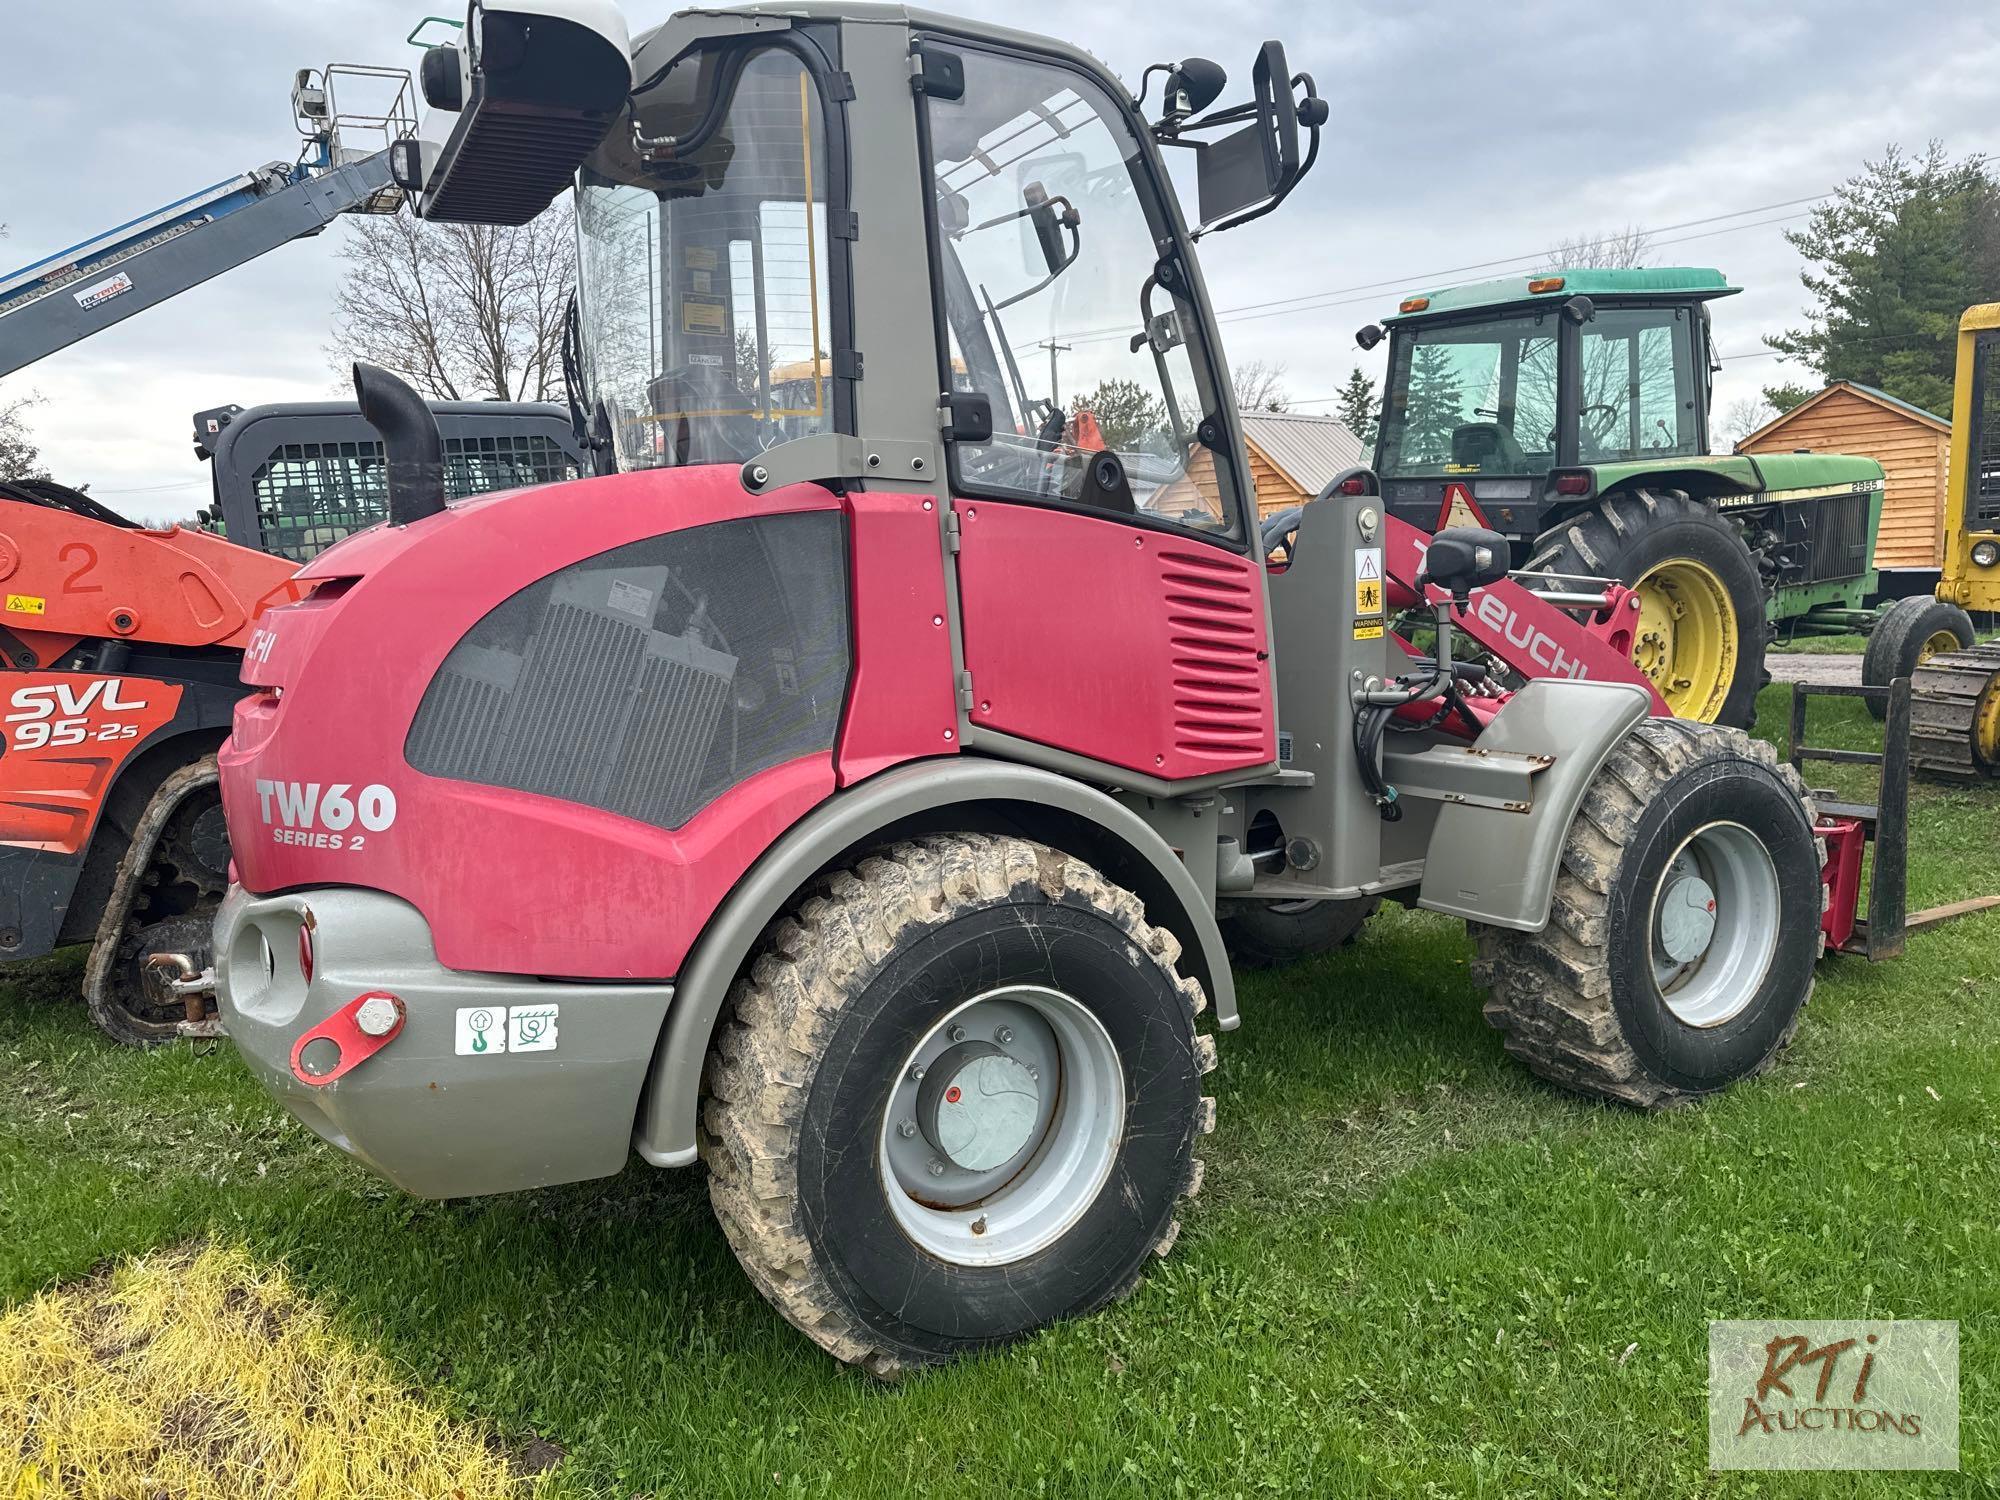 Takeuchi TW60 series 2 mini wheel loader, hydraulic quick coupler, 48in forks, cab, heat, A/C, 640